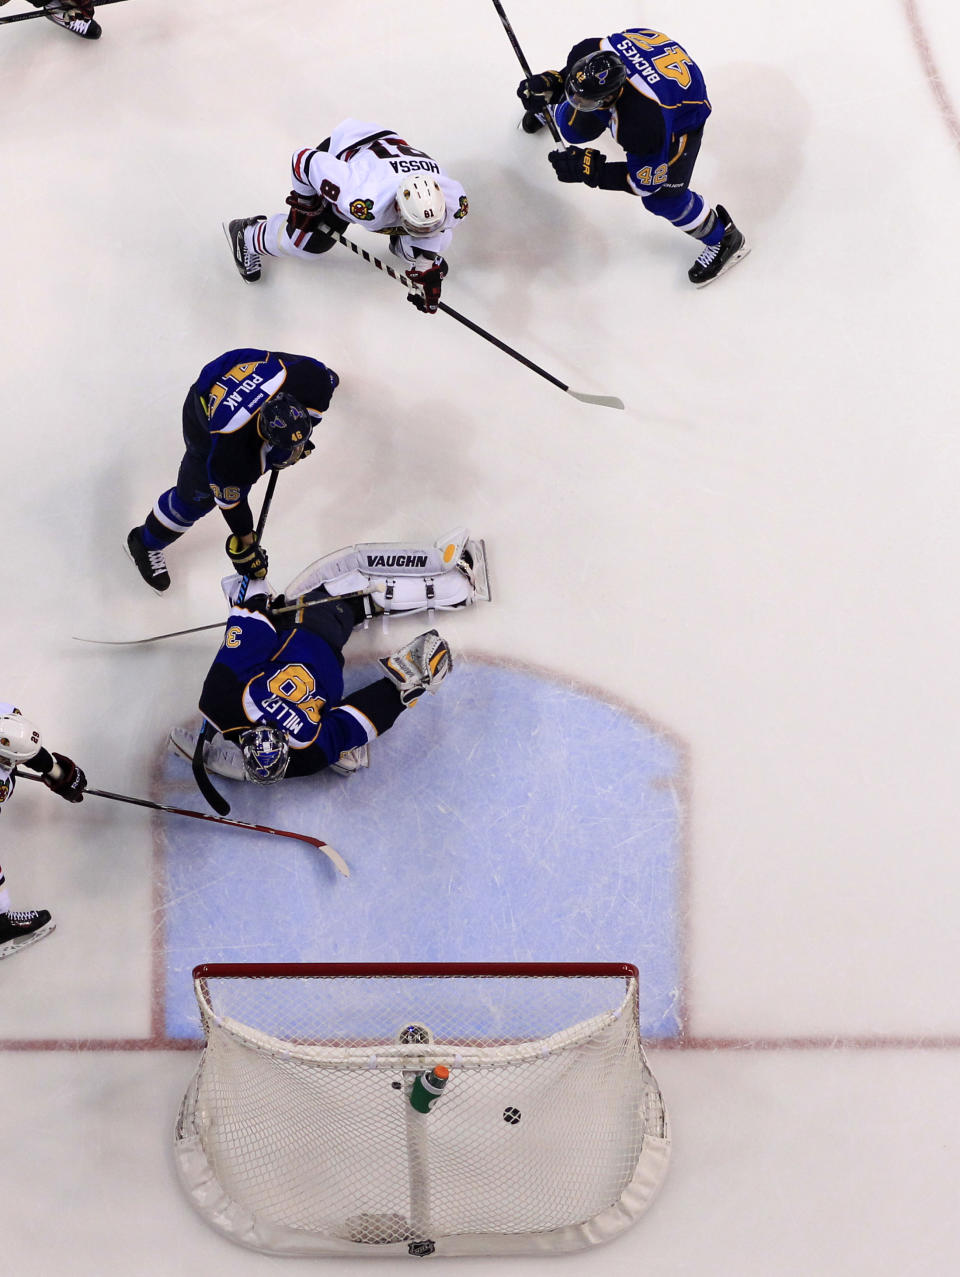 Chicago Blackhawks' Marian Hossa, top left, of Slovakia, scores past St. Louis Blues goalie Ryan Miller, bottom, Roman Polak, of the Czech Republic, and David Backes, top right, during the first period in Game 5 of a first-round NHL hockey playoff series Friday, April 25, 2014, in St. Louis. (AP Photo/Jeff Roberson)